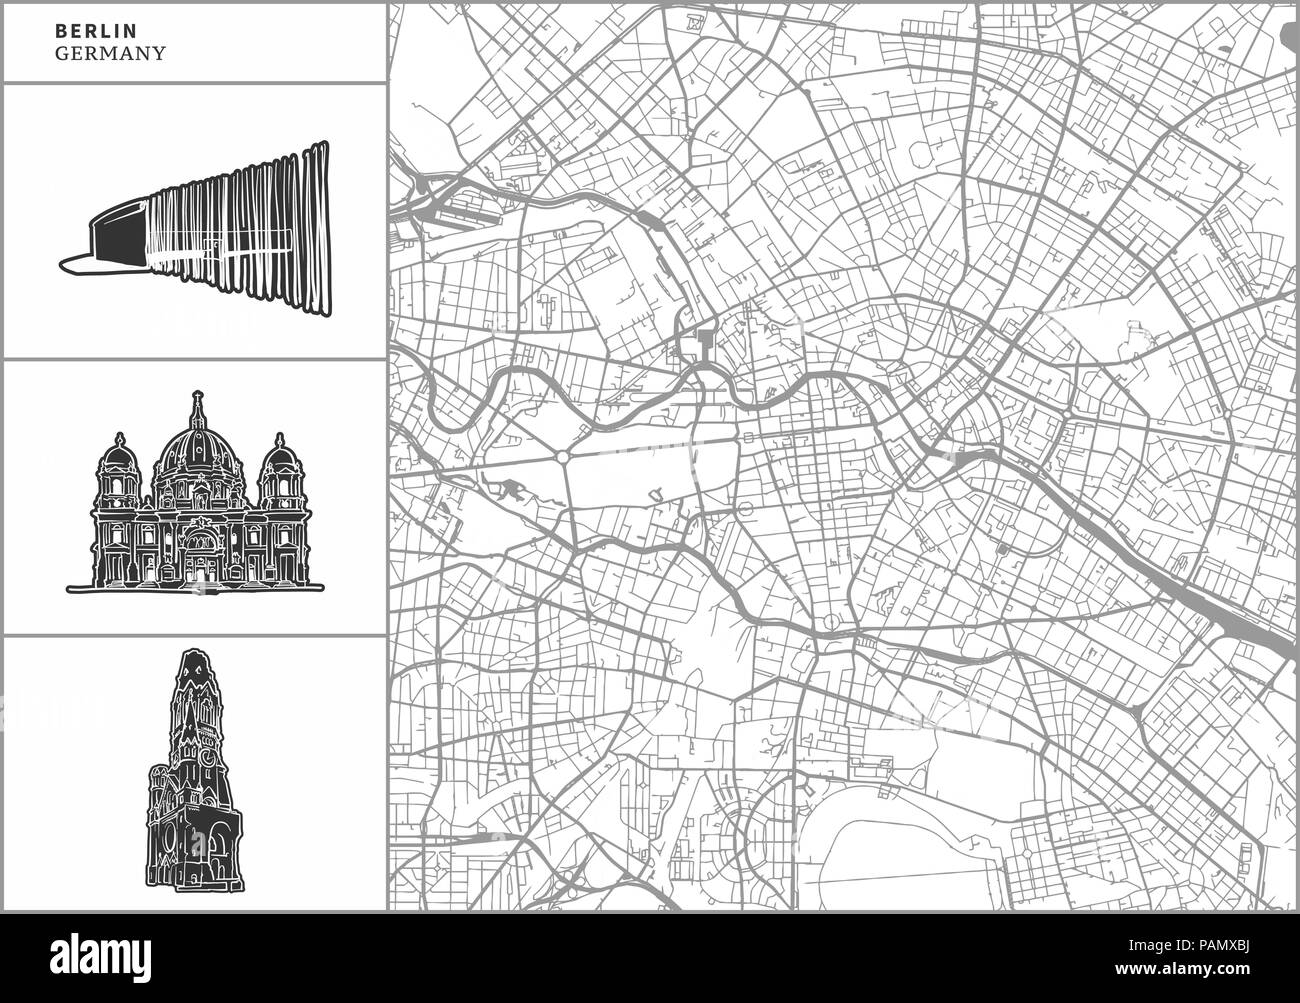 Divided berlin map Black and White Stock Photos & Images - Alamy